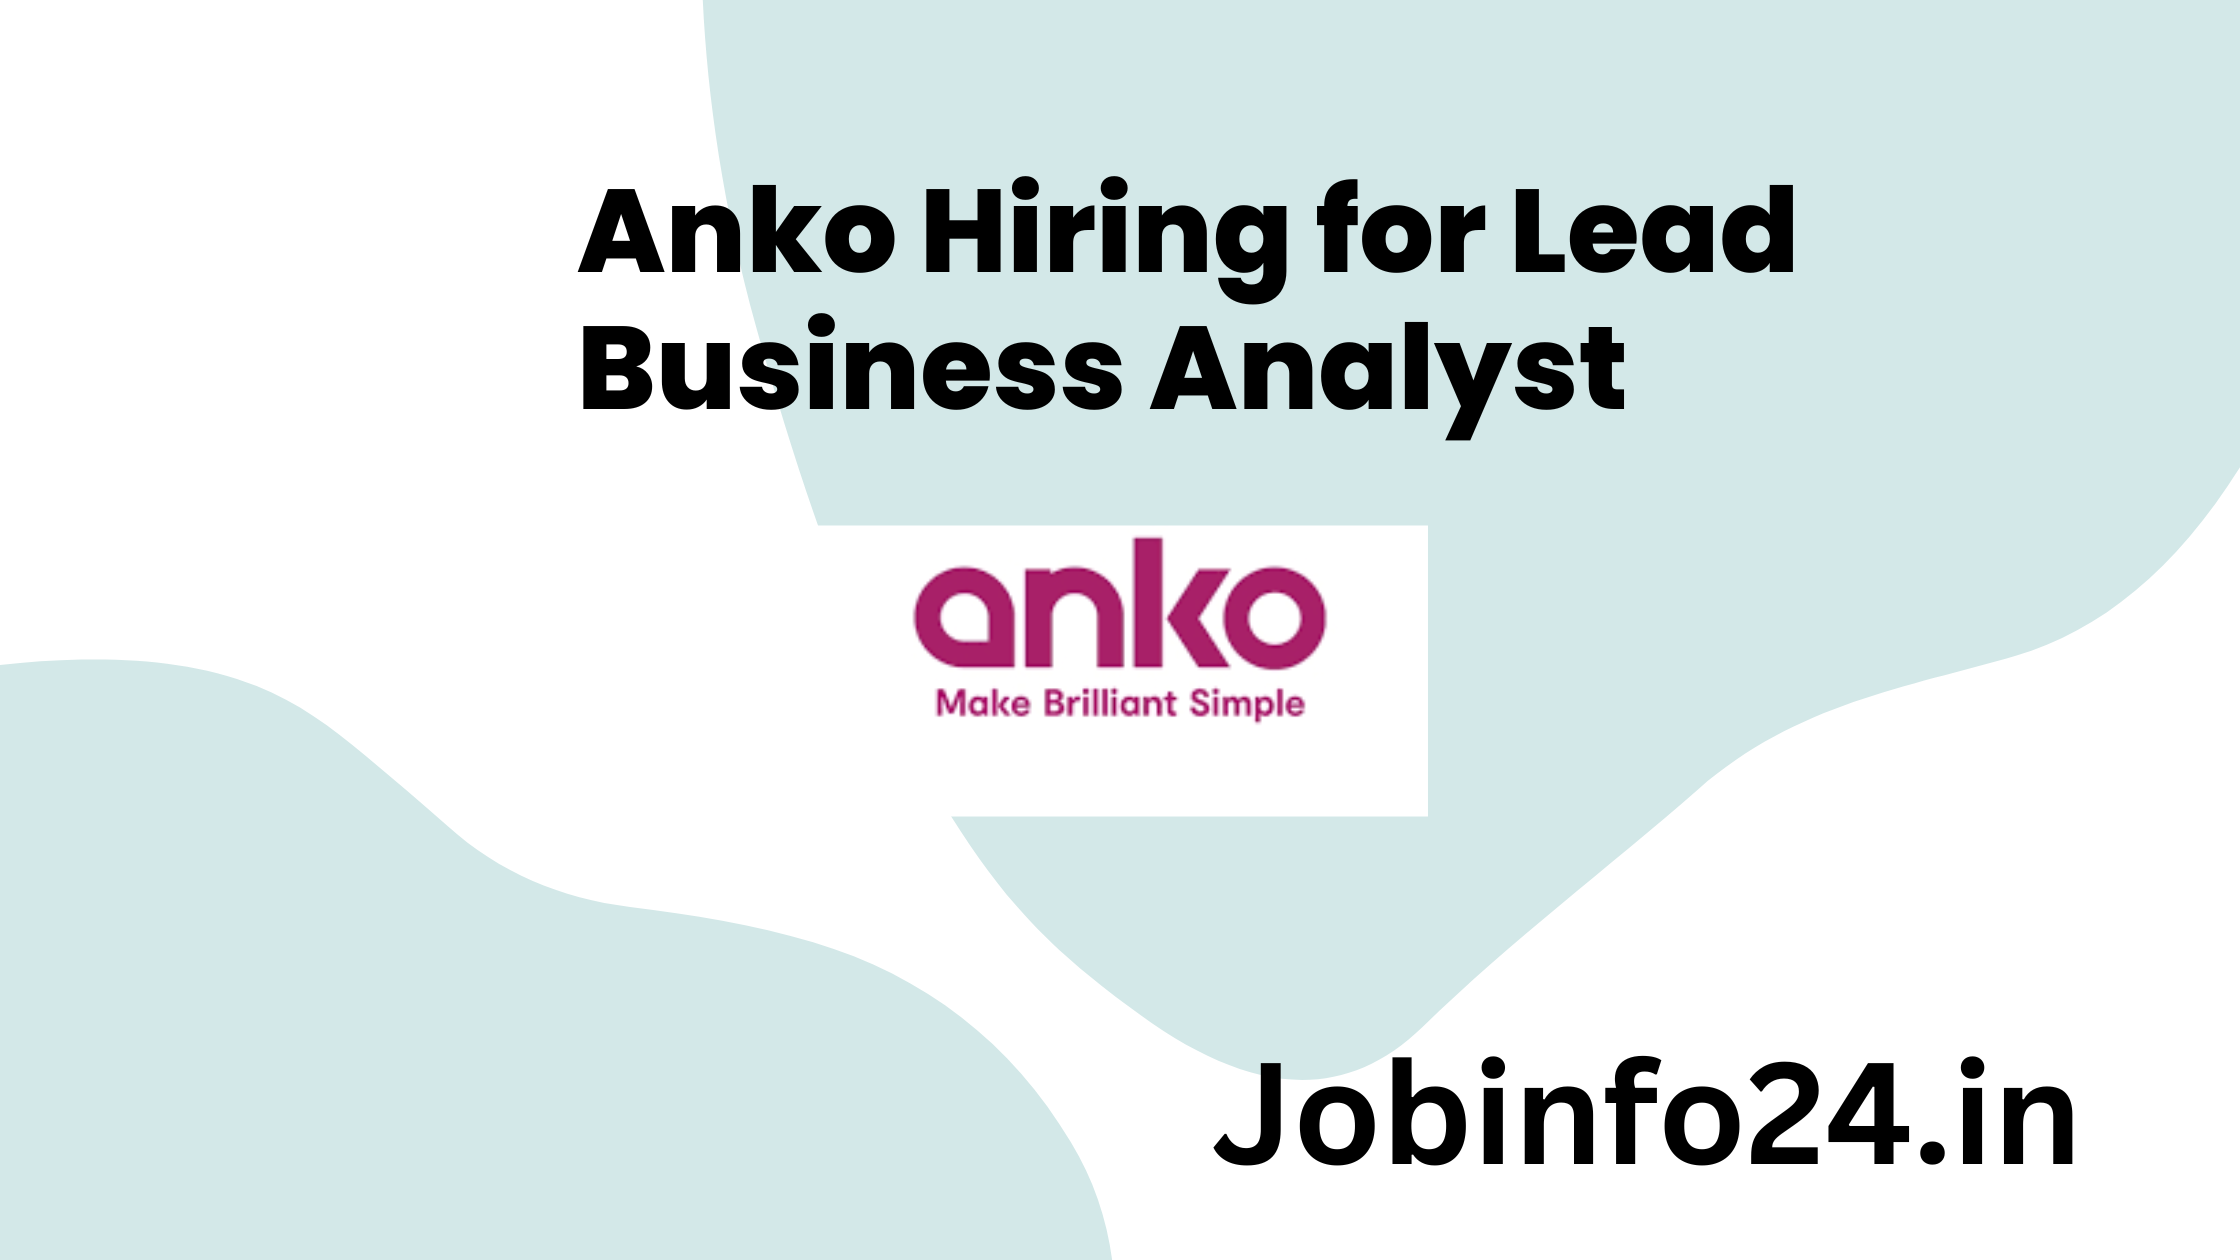 Anko Hiring for Lead Business Analyst